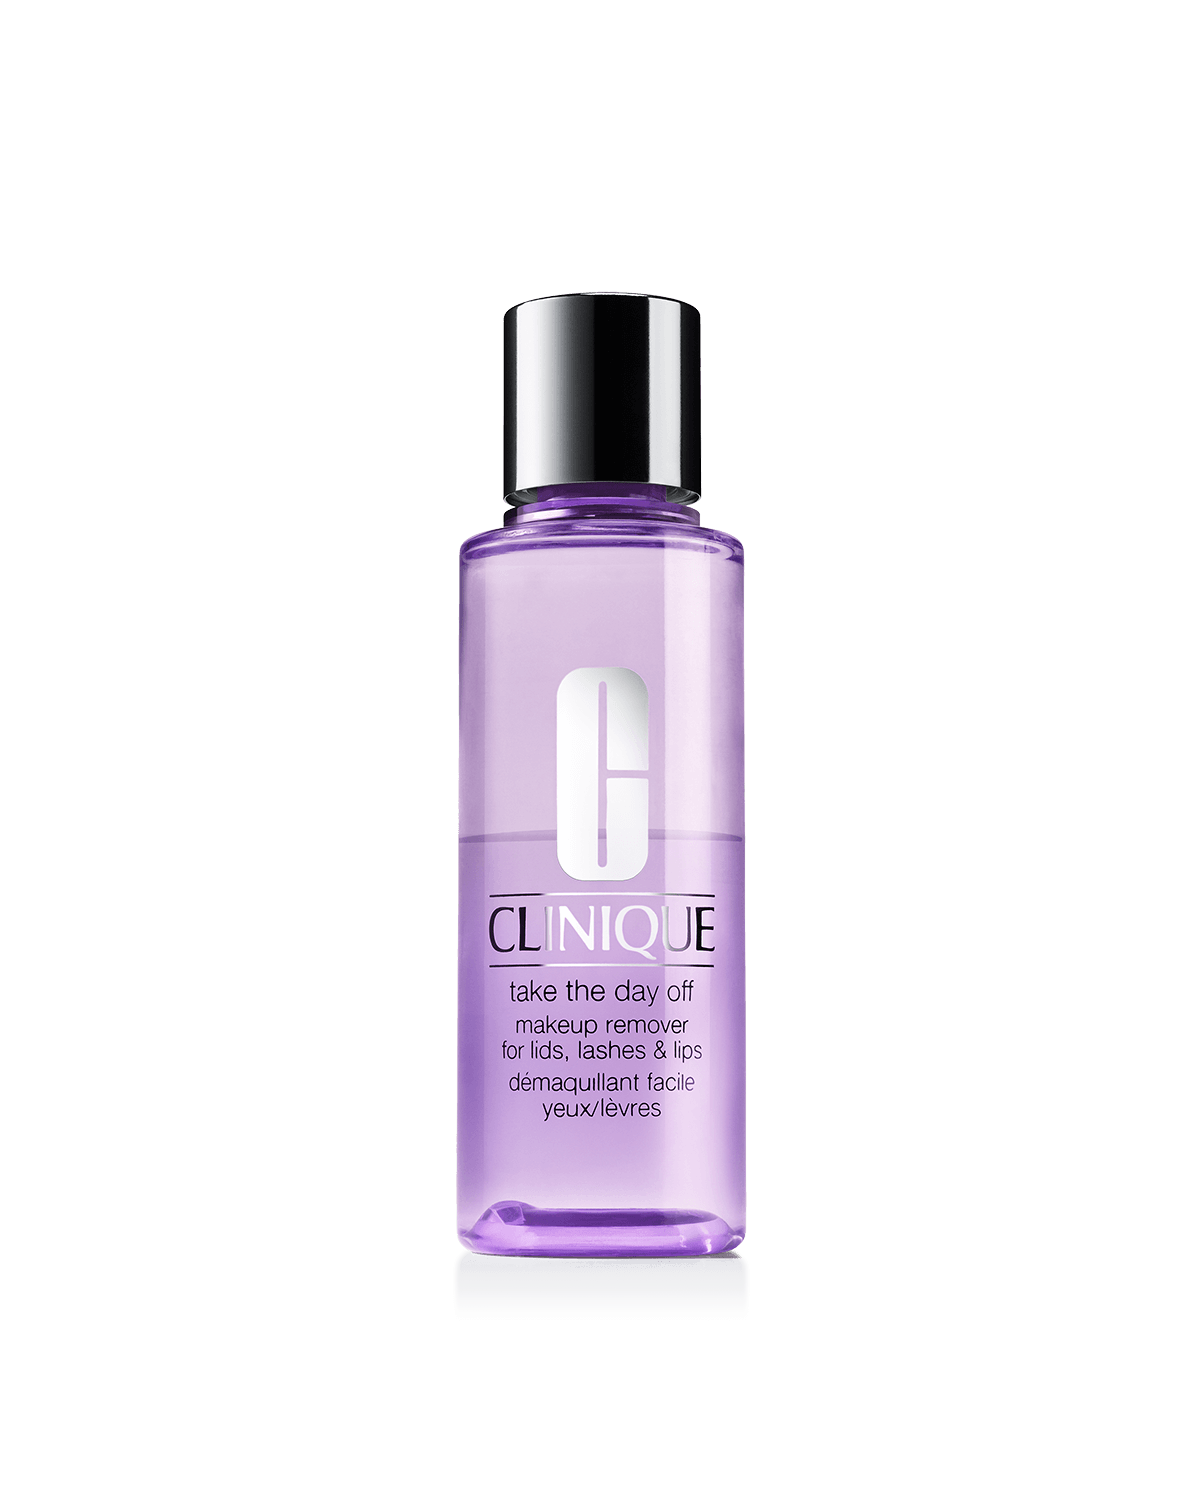 Clinique Take the Day Off Makeup Remover for Lids, Lashes & Lips